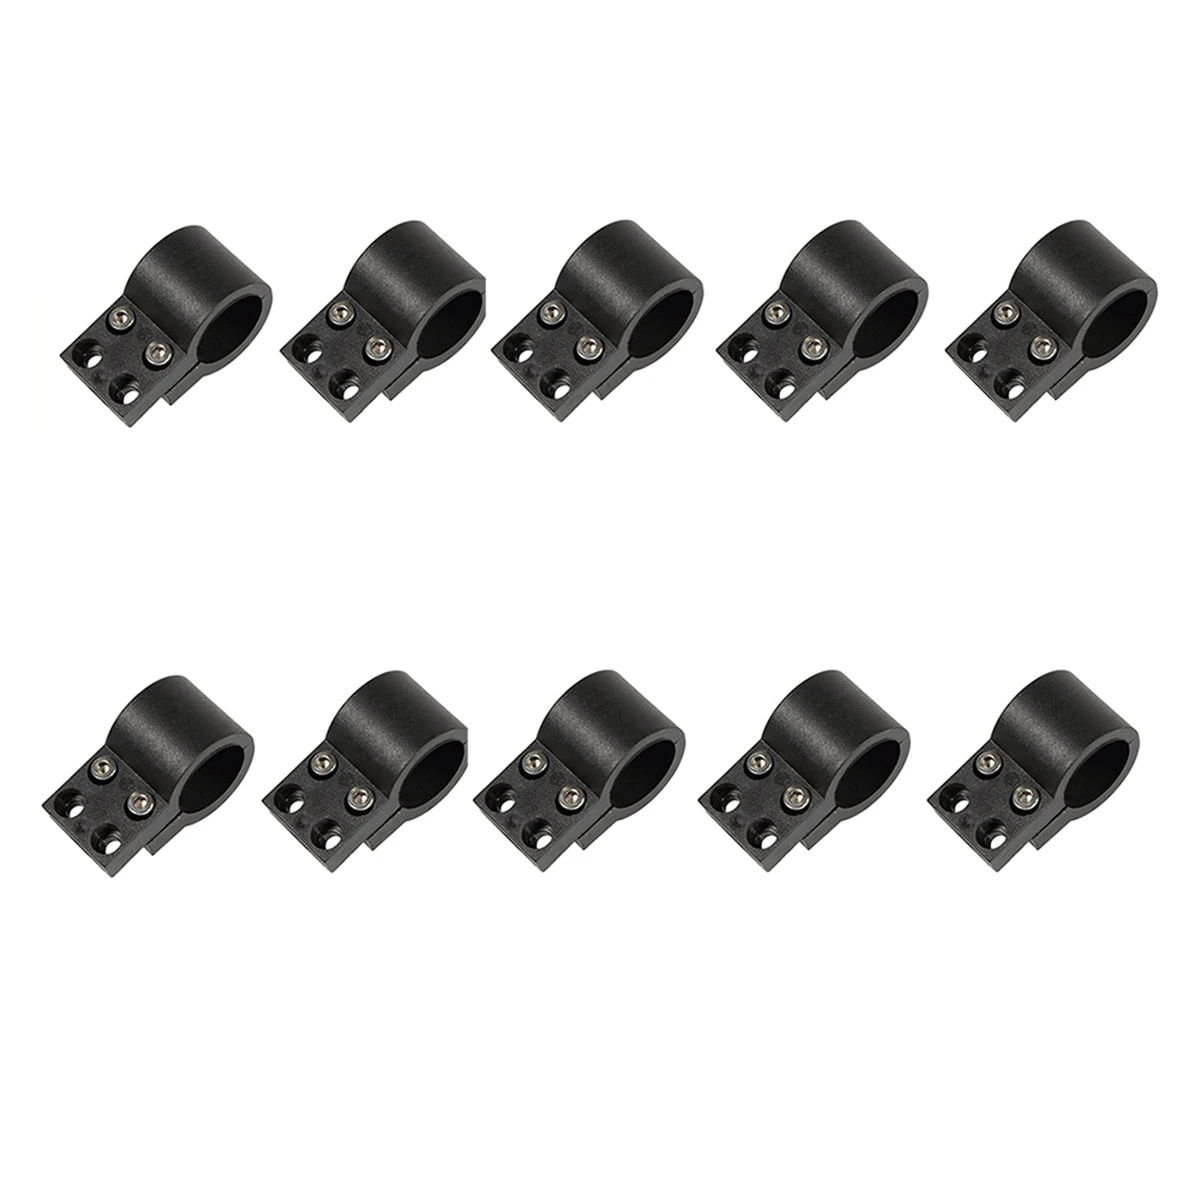 

10Pcs LCD Throttle Base Bracket for Electric Scooter Speedual Zero 8 9 10 8X 10X 11X QS-4S Display Connector Holder